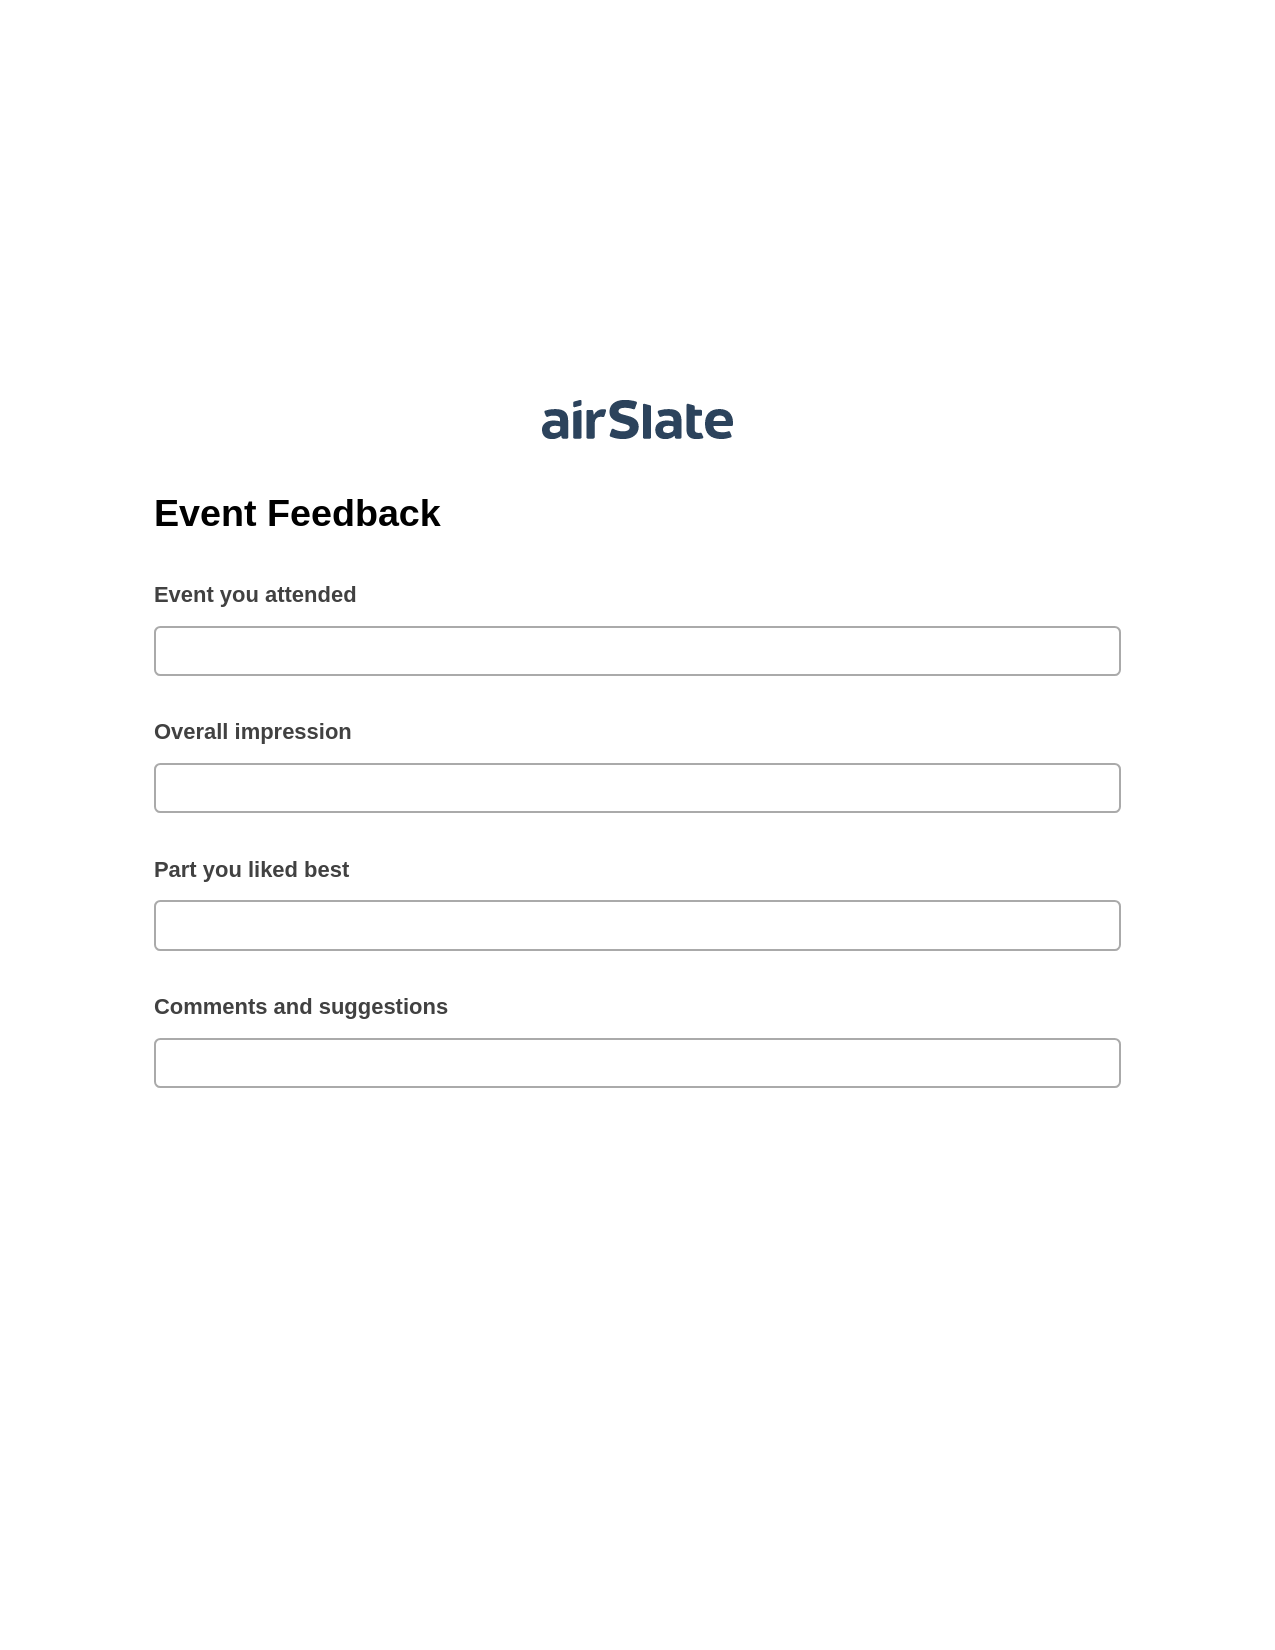 Multirole Event Feedback Pre-fill from Salesforce Records with SOQL Bot, Lock the slate bot, Export to Smartsheet